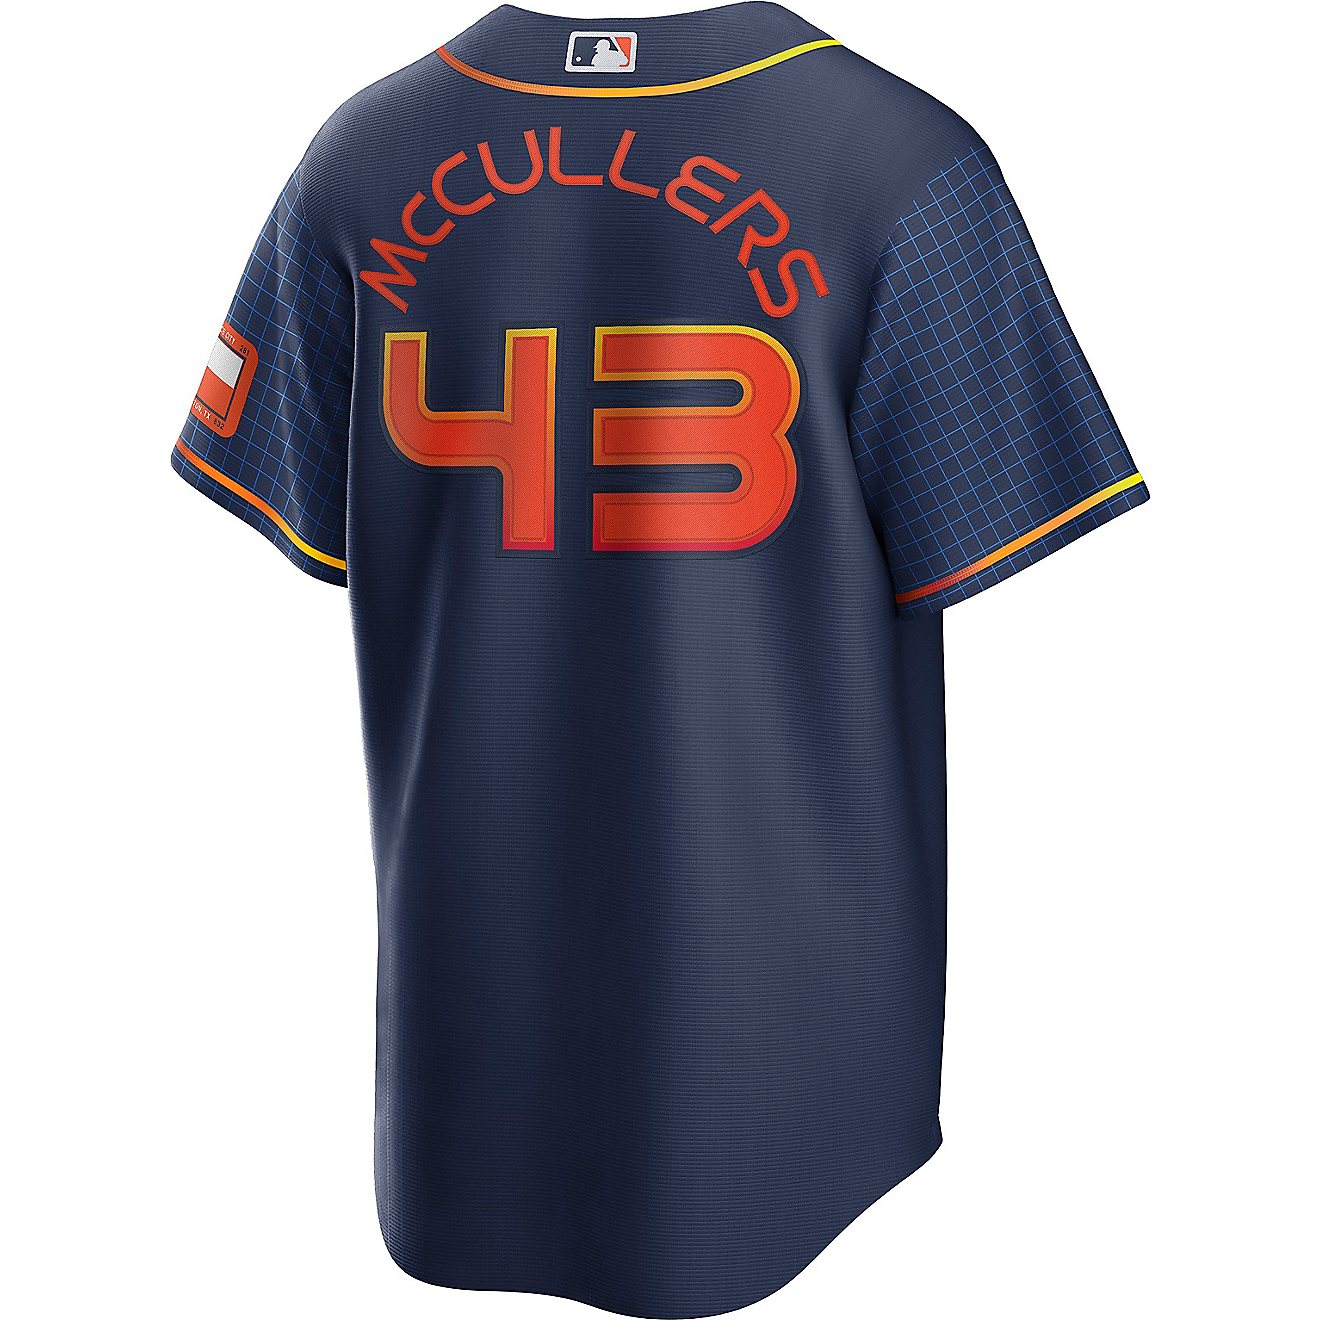 city connect astros jerseys